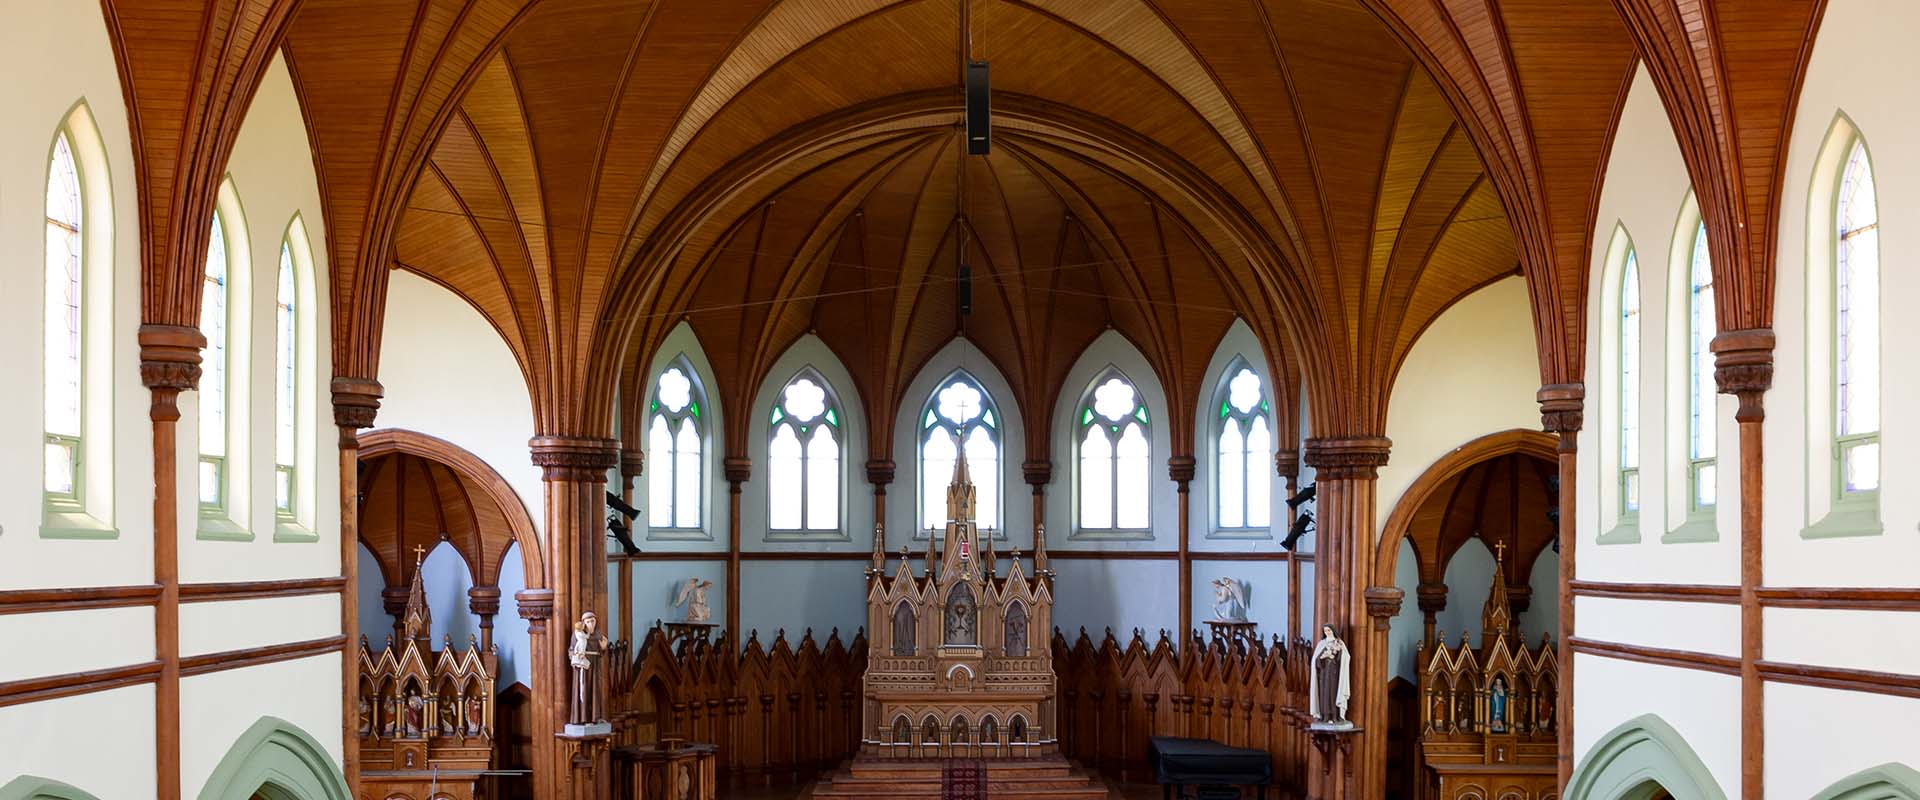 An interior view of St. Mary's Roman Catholic Church in Indian River, Prince Edward Island, looking from the rear of the church towards the altar and highlighting the wooden arch ceiling.